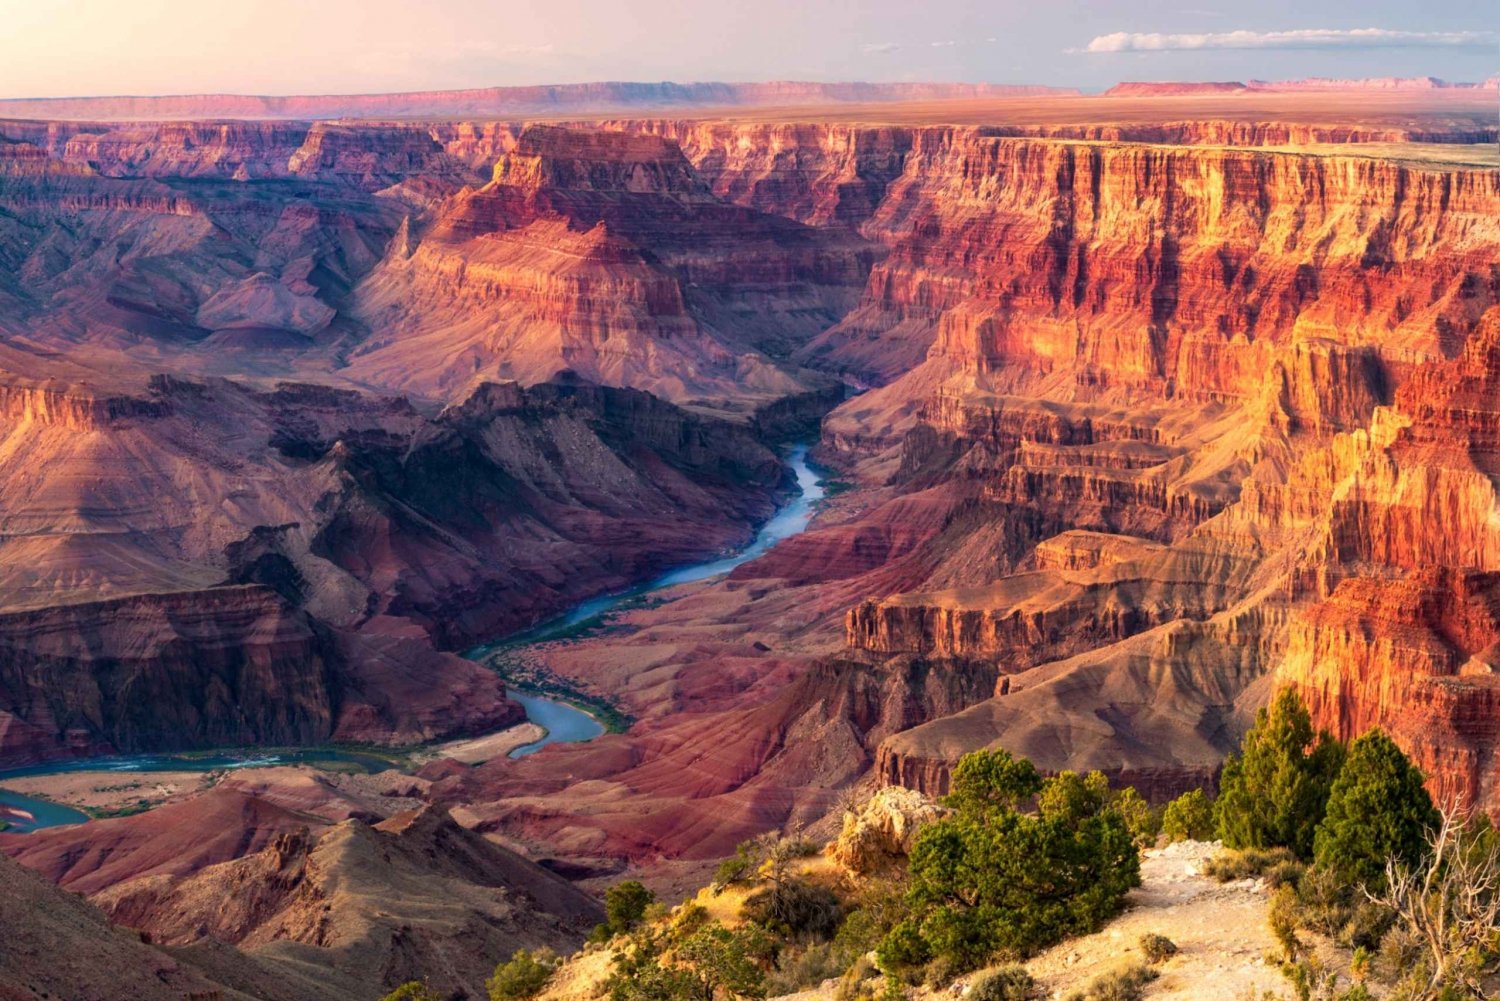 Las Vegas: Grand Canyon and Route 66 Tour with Lunch